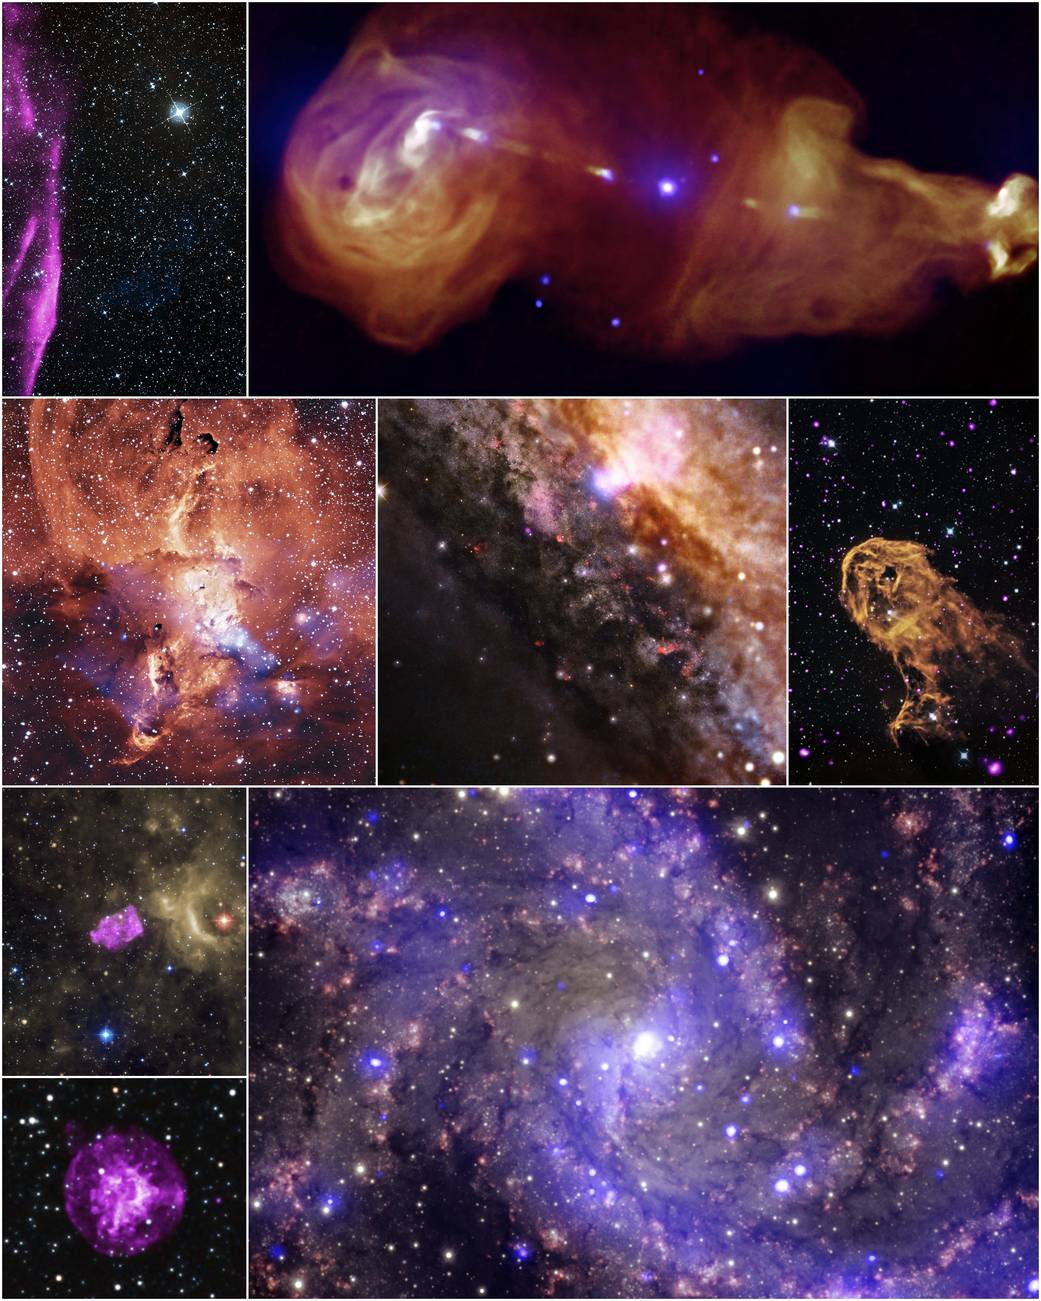 Collage of images released to the public by the Chandra Data Archive in October 2013